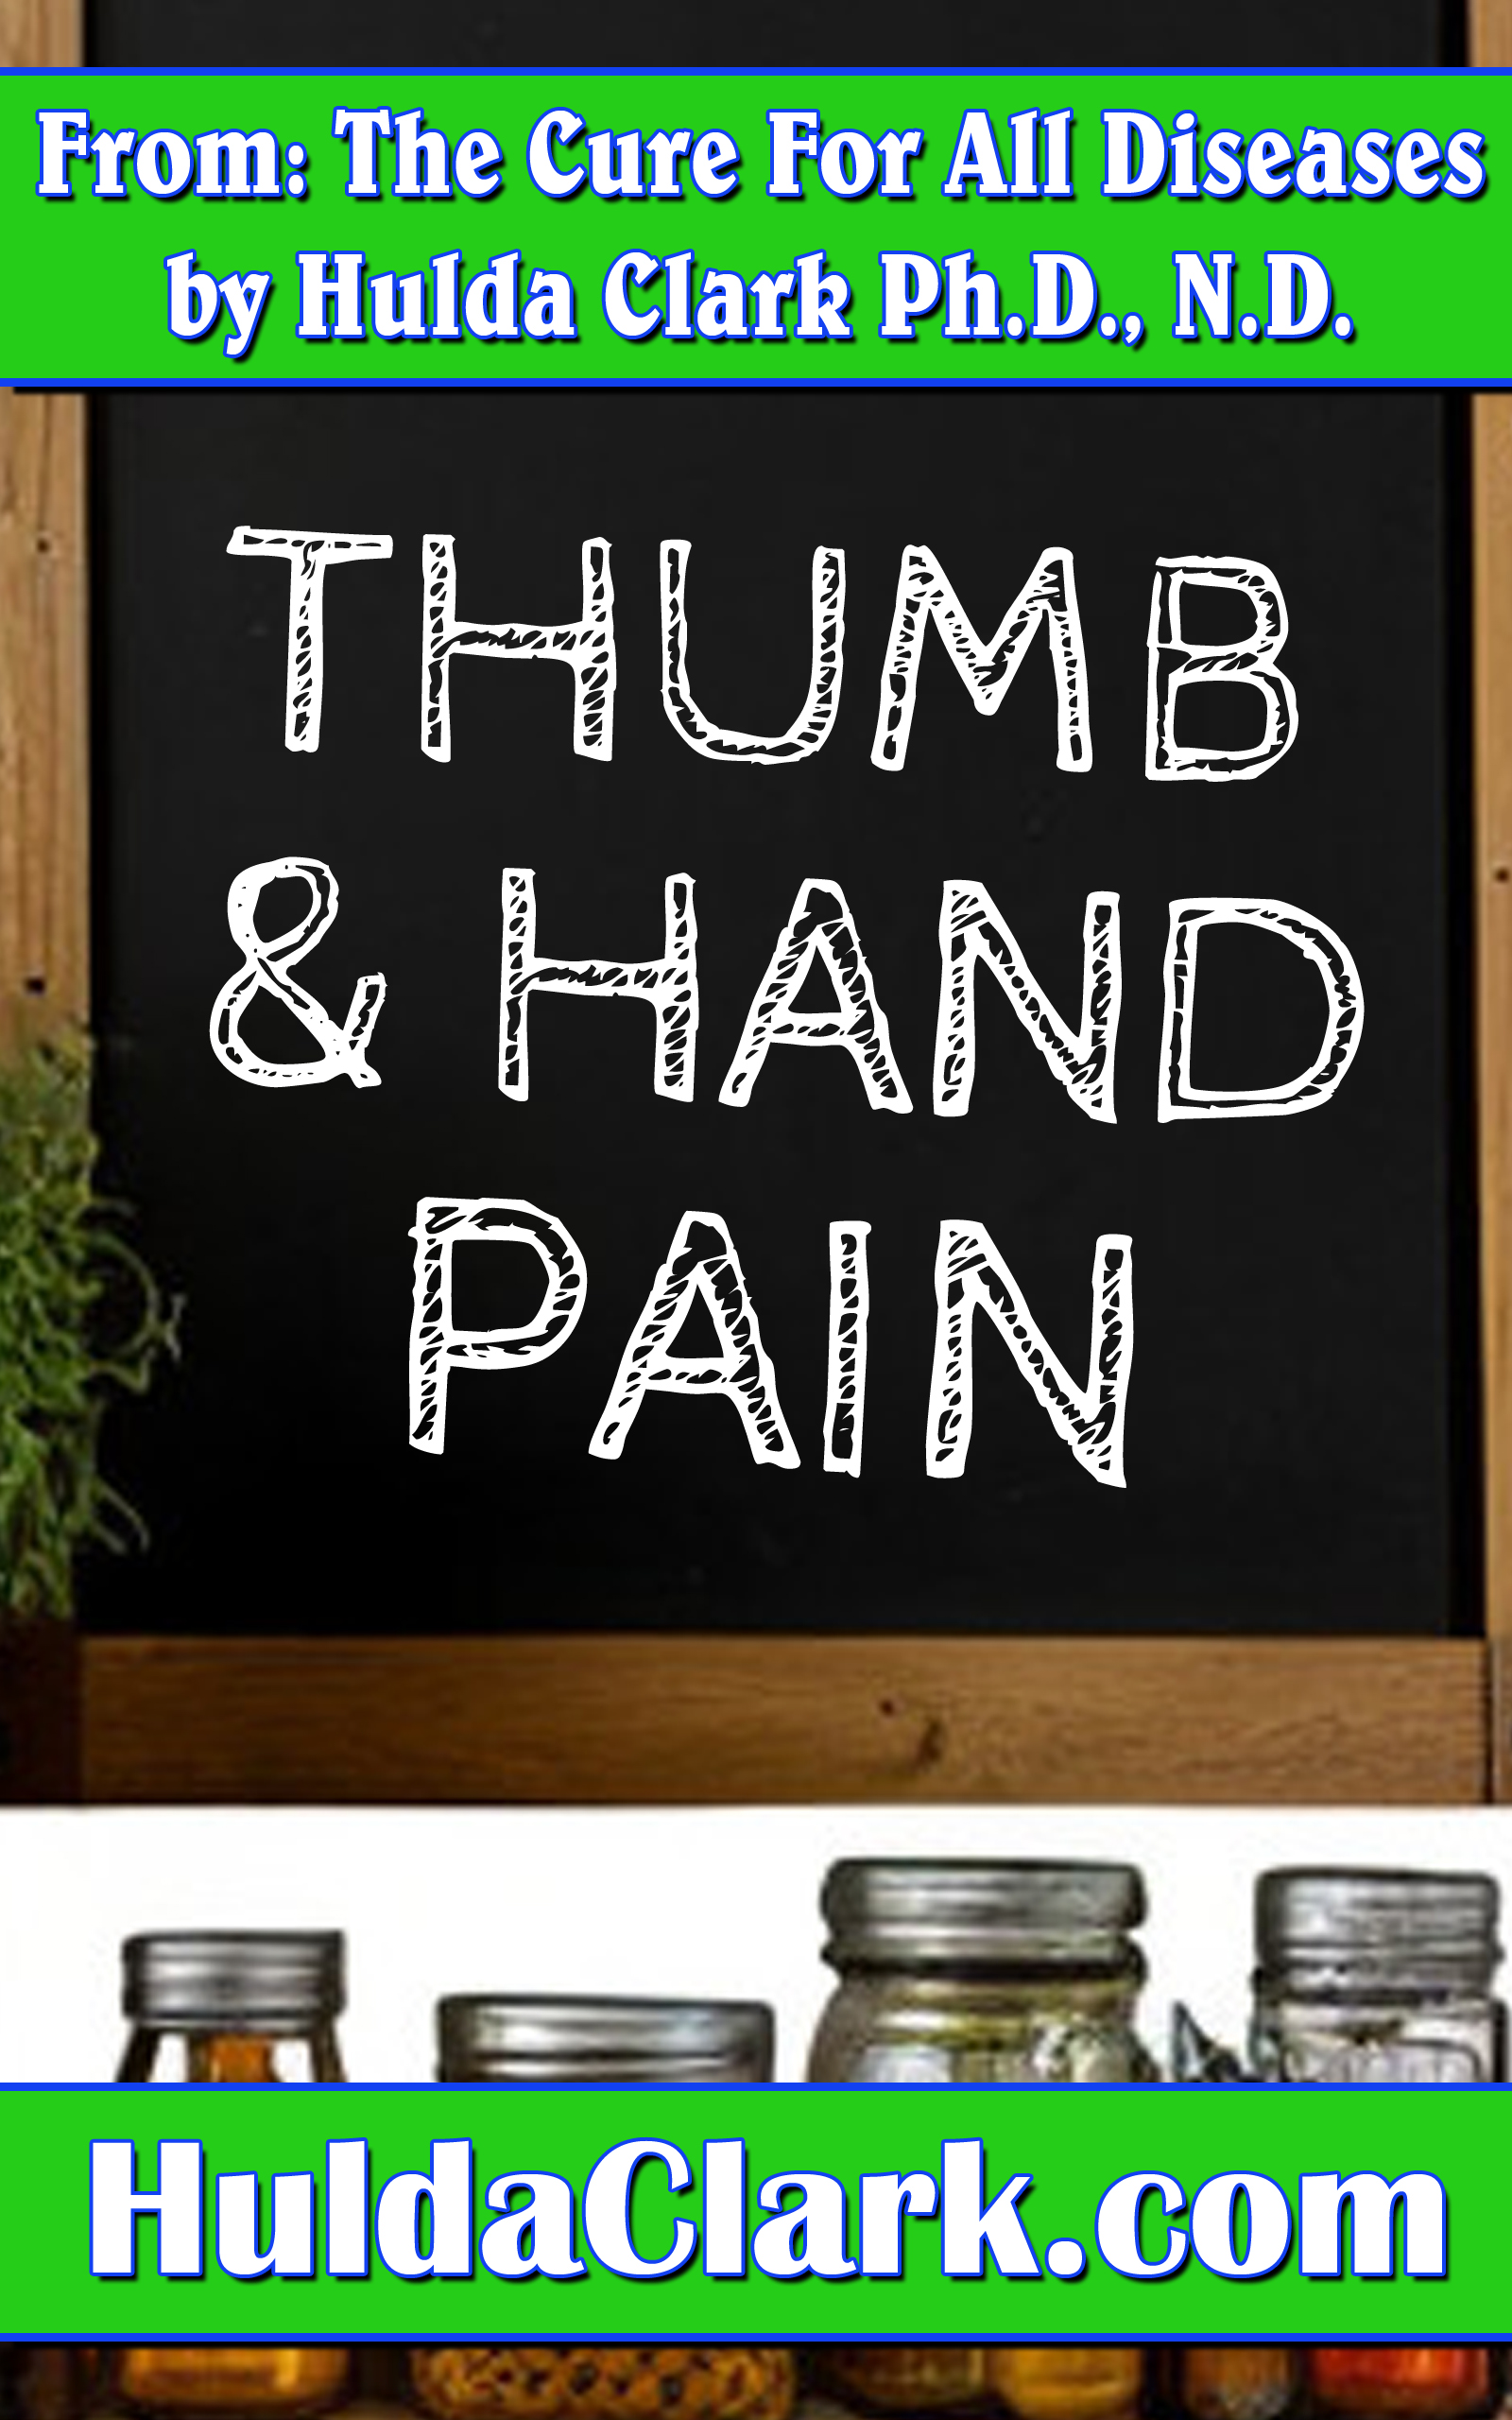 Thumb Hand Pain Ebook excerpt from The Cure for All Diseases by Hulda Clark